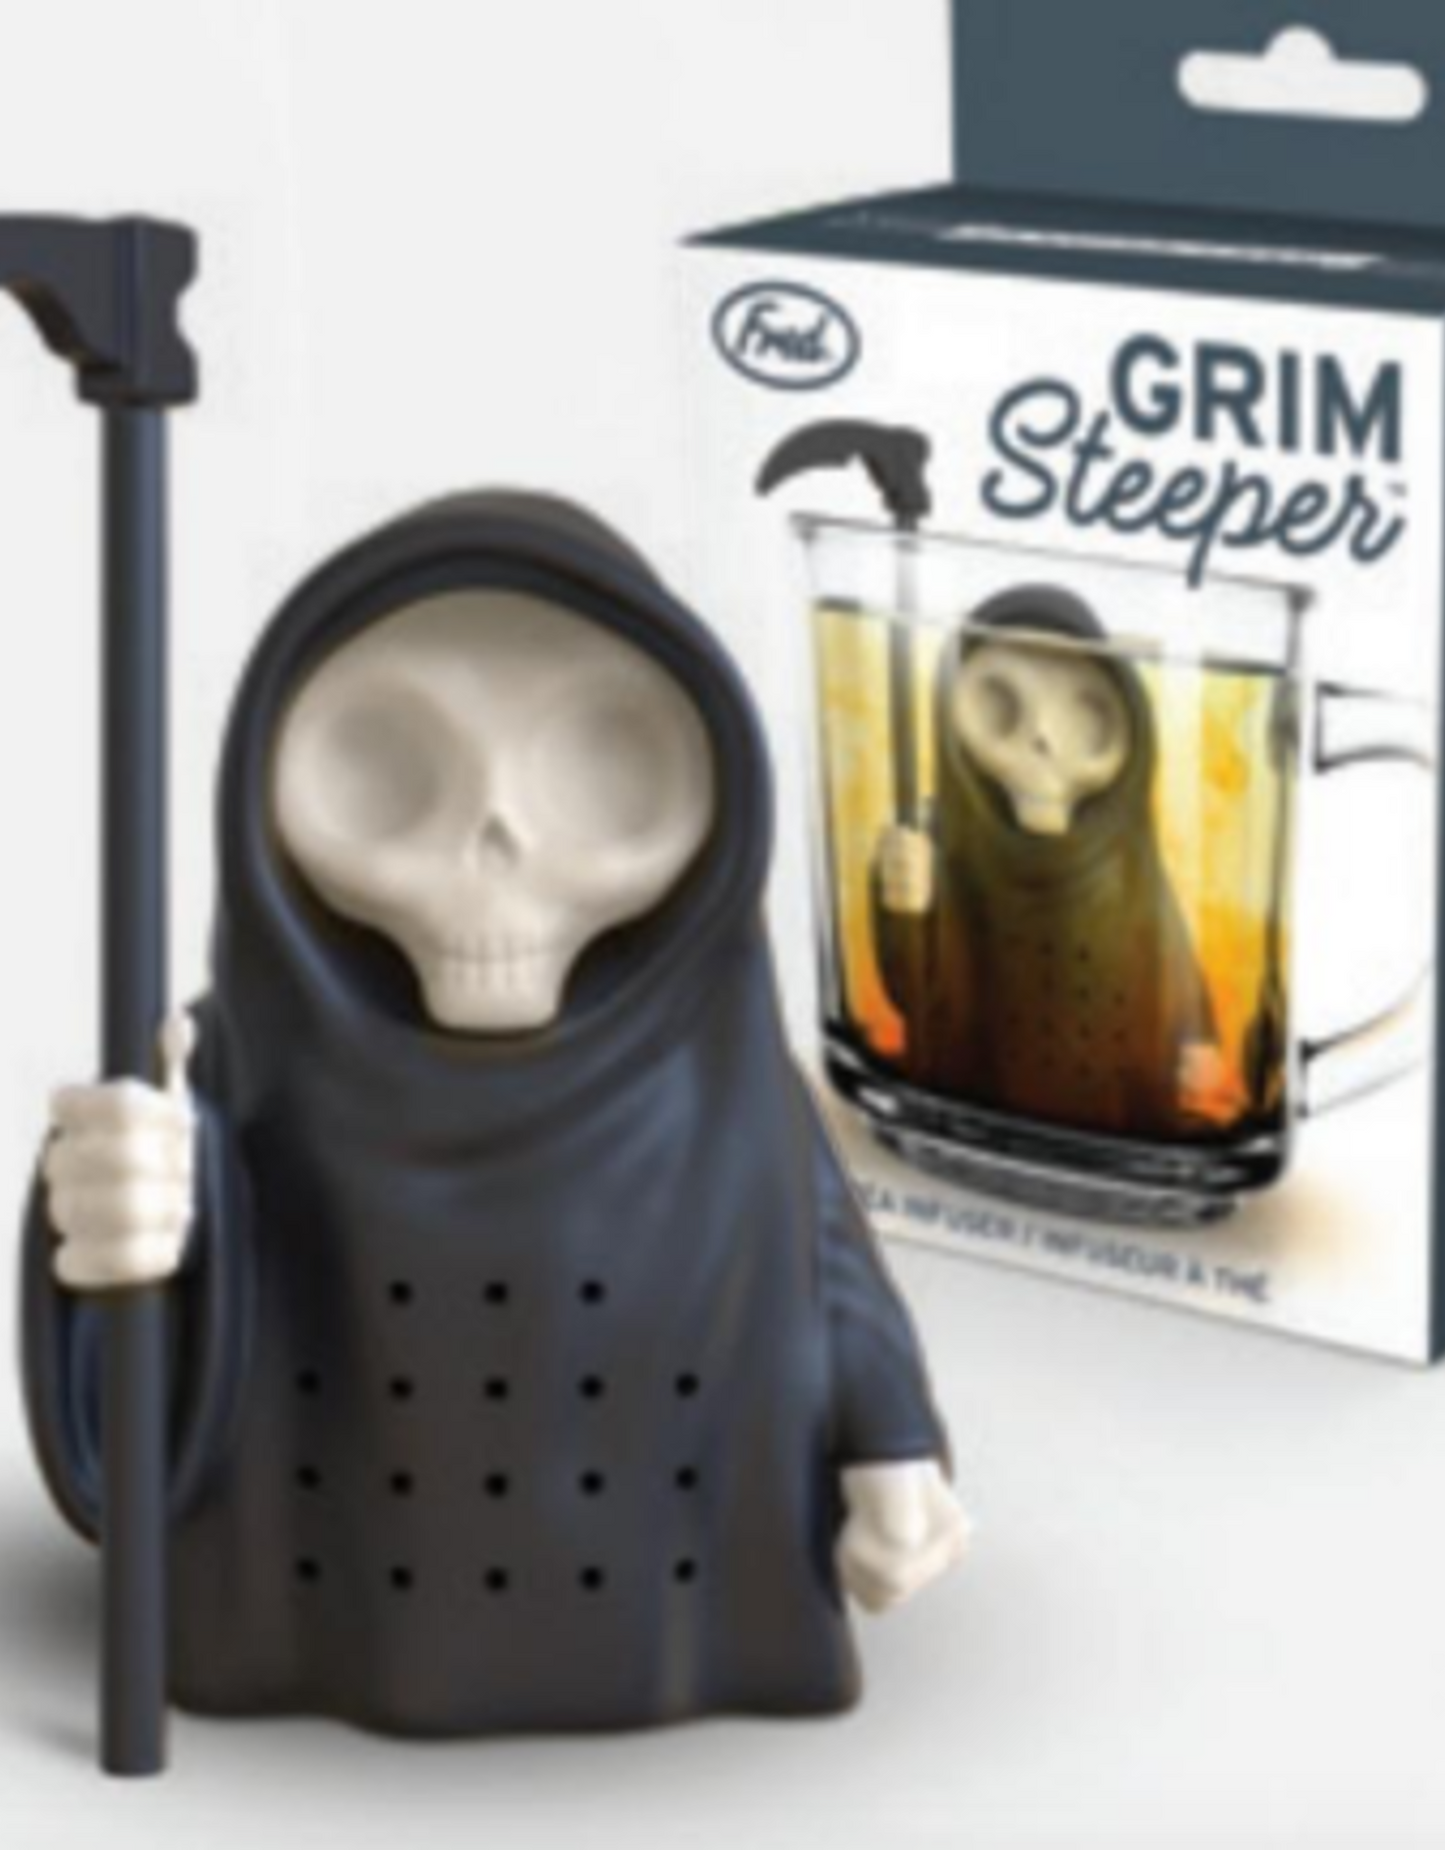 Grim Steeper Tea Infuser set in front of its box packaging.